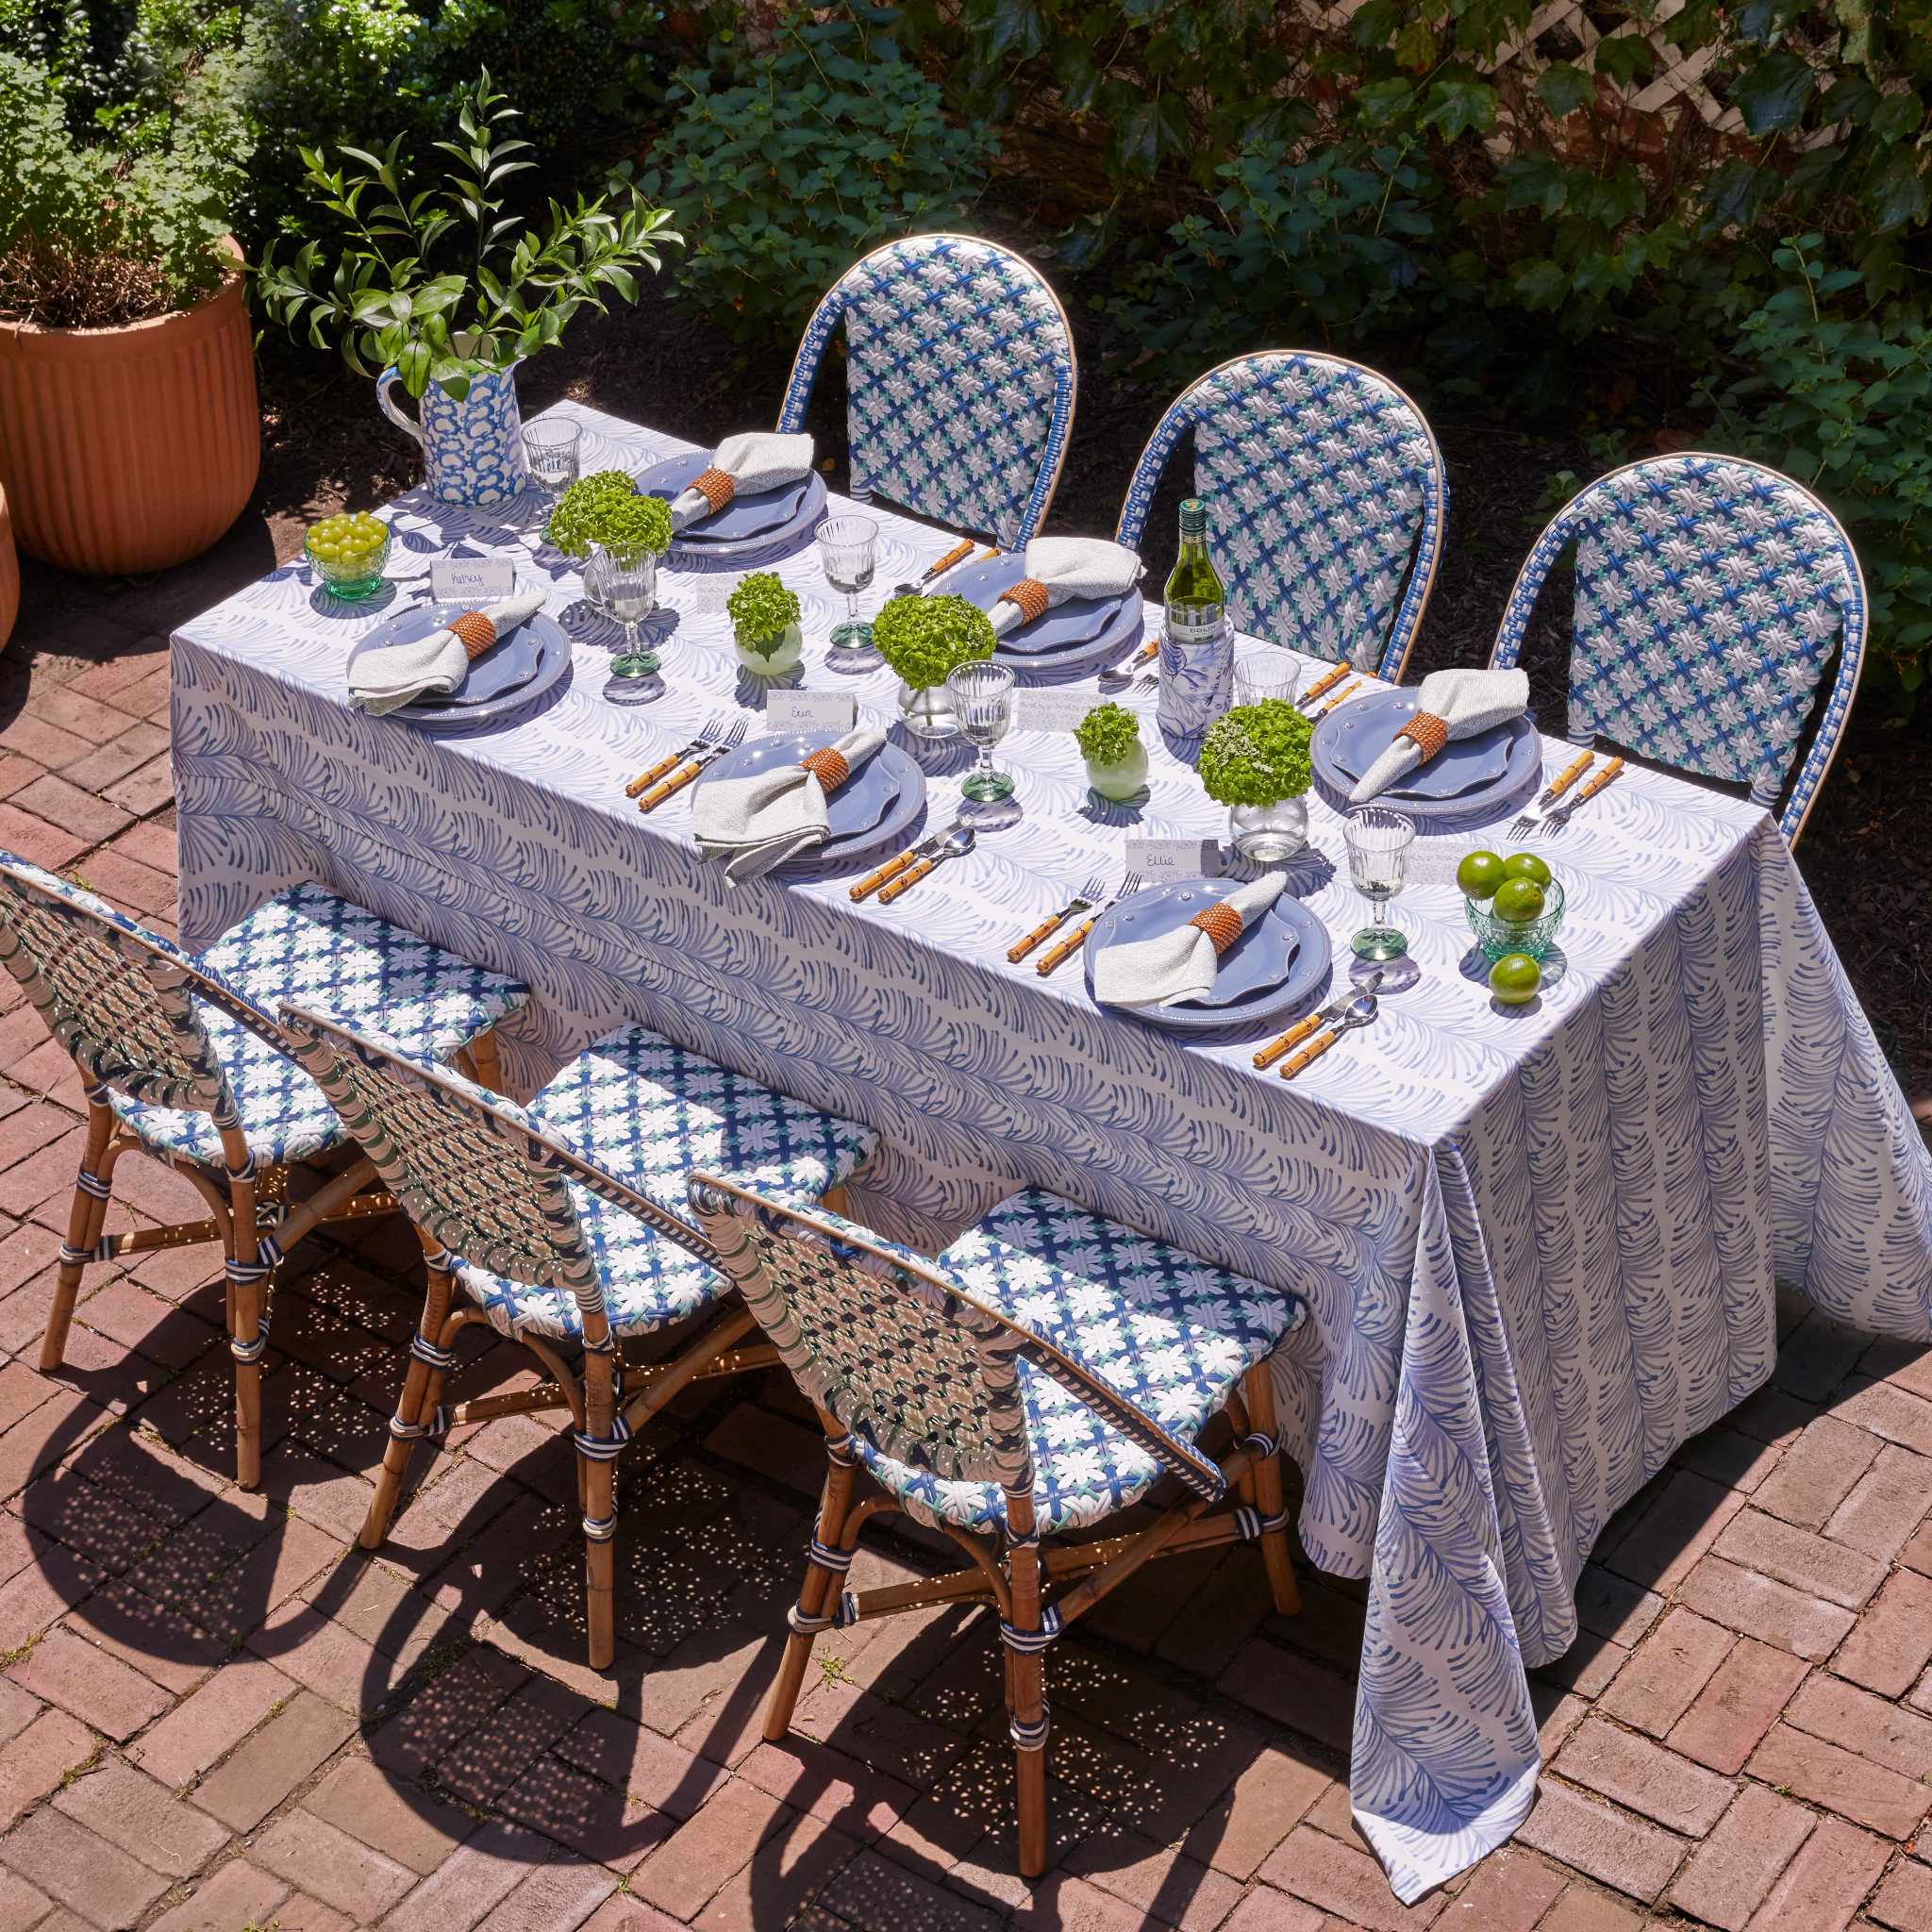 Table styled with Sky Blue Botanical Stripe Tablecloth and Moss Green Geometric Napkins on blue plates and silverware next to them with fruit cups to the side and plants for decoration in the center